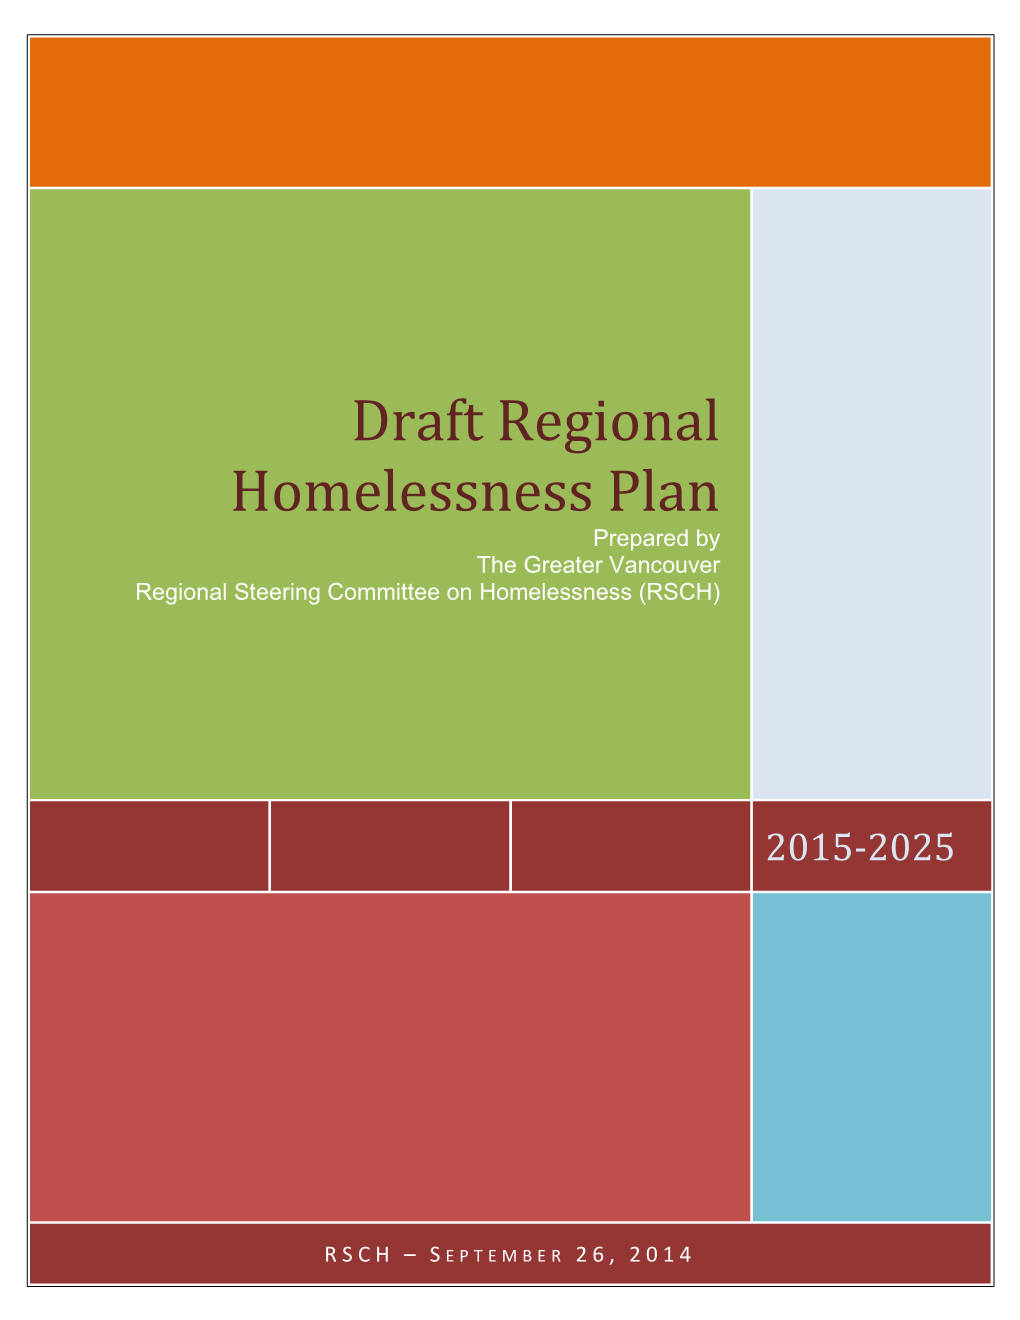 Draft Regional Homelessness Plan Prepared by the Greater Vancouver Regional Steering Committee on Homelessness (RSCH)